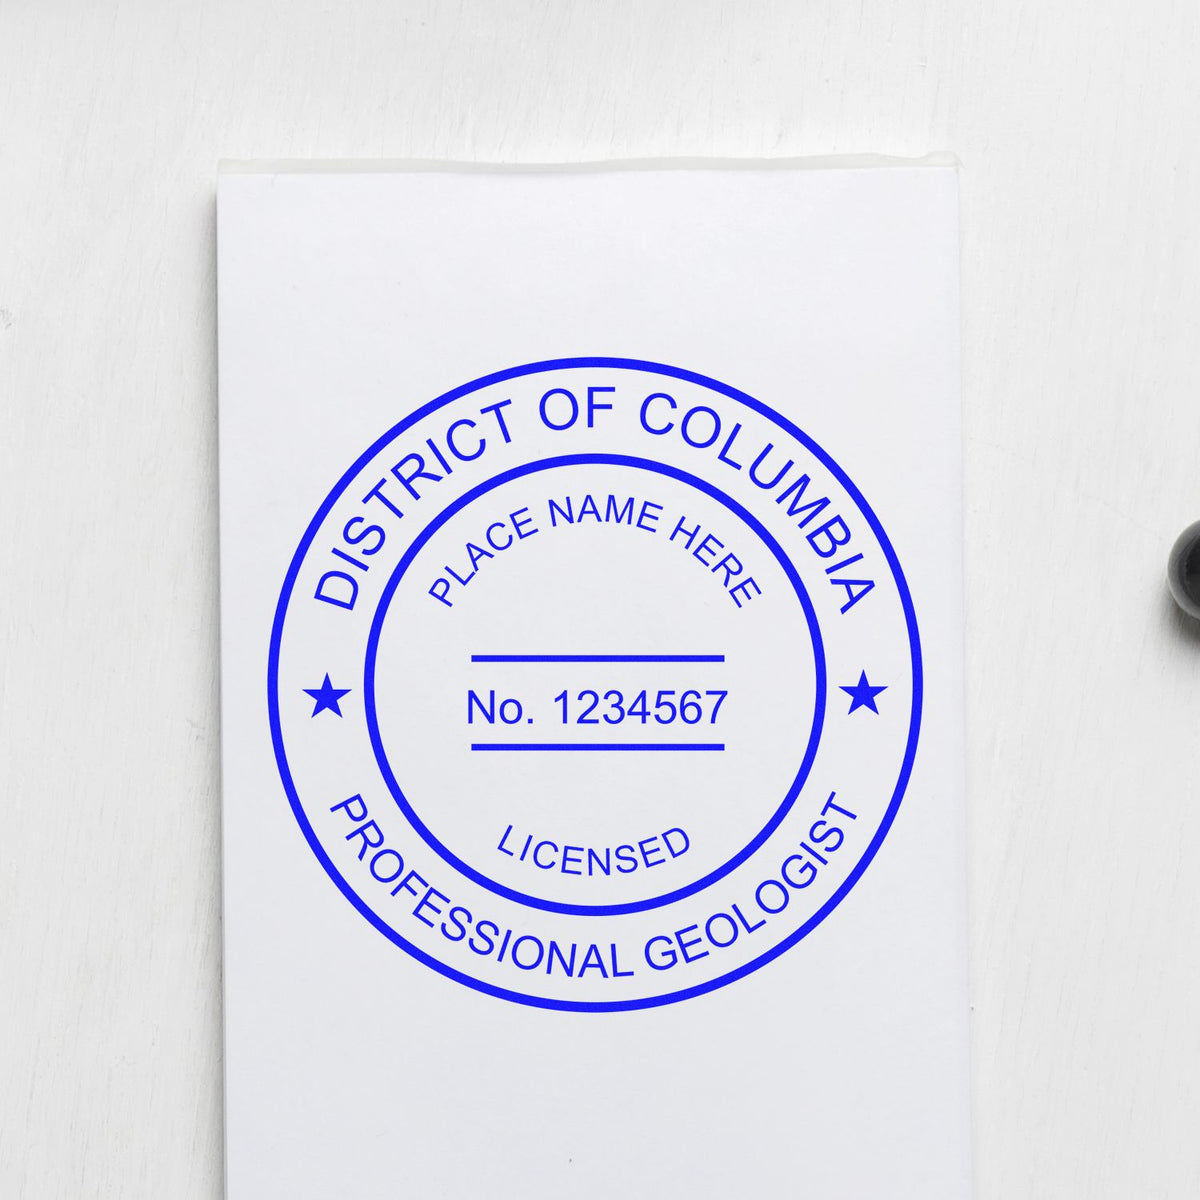 An alternative view of the District of Columbia Professional Geologist Seal Stamp stamped on a sheet of paper showing the image in use